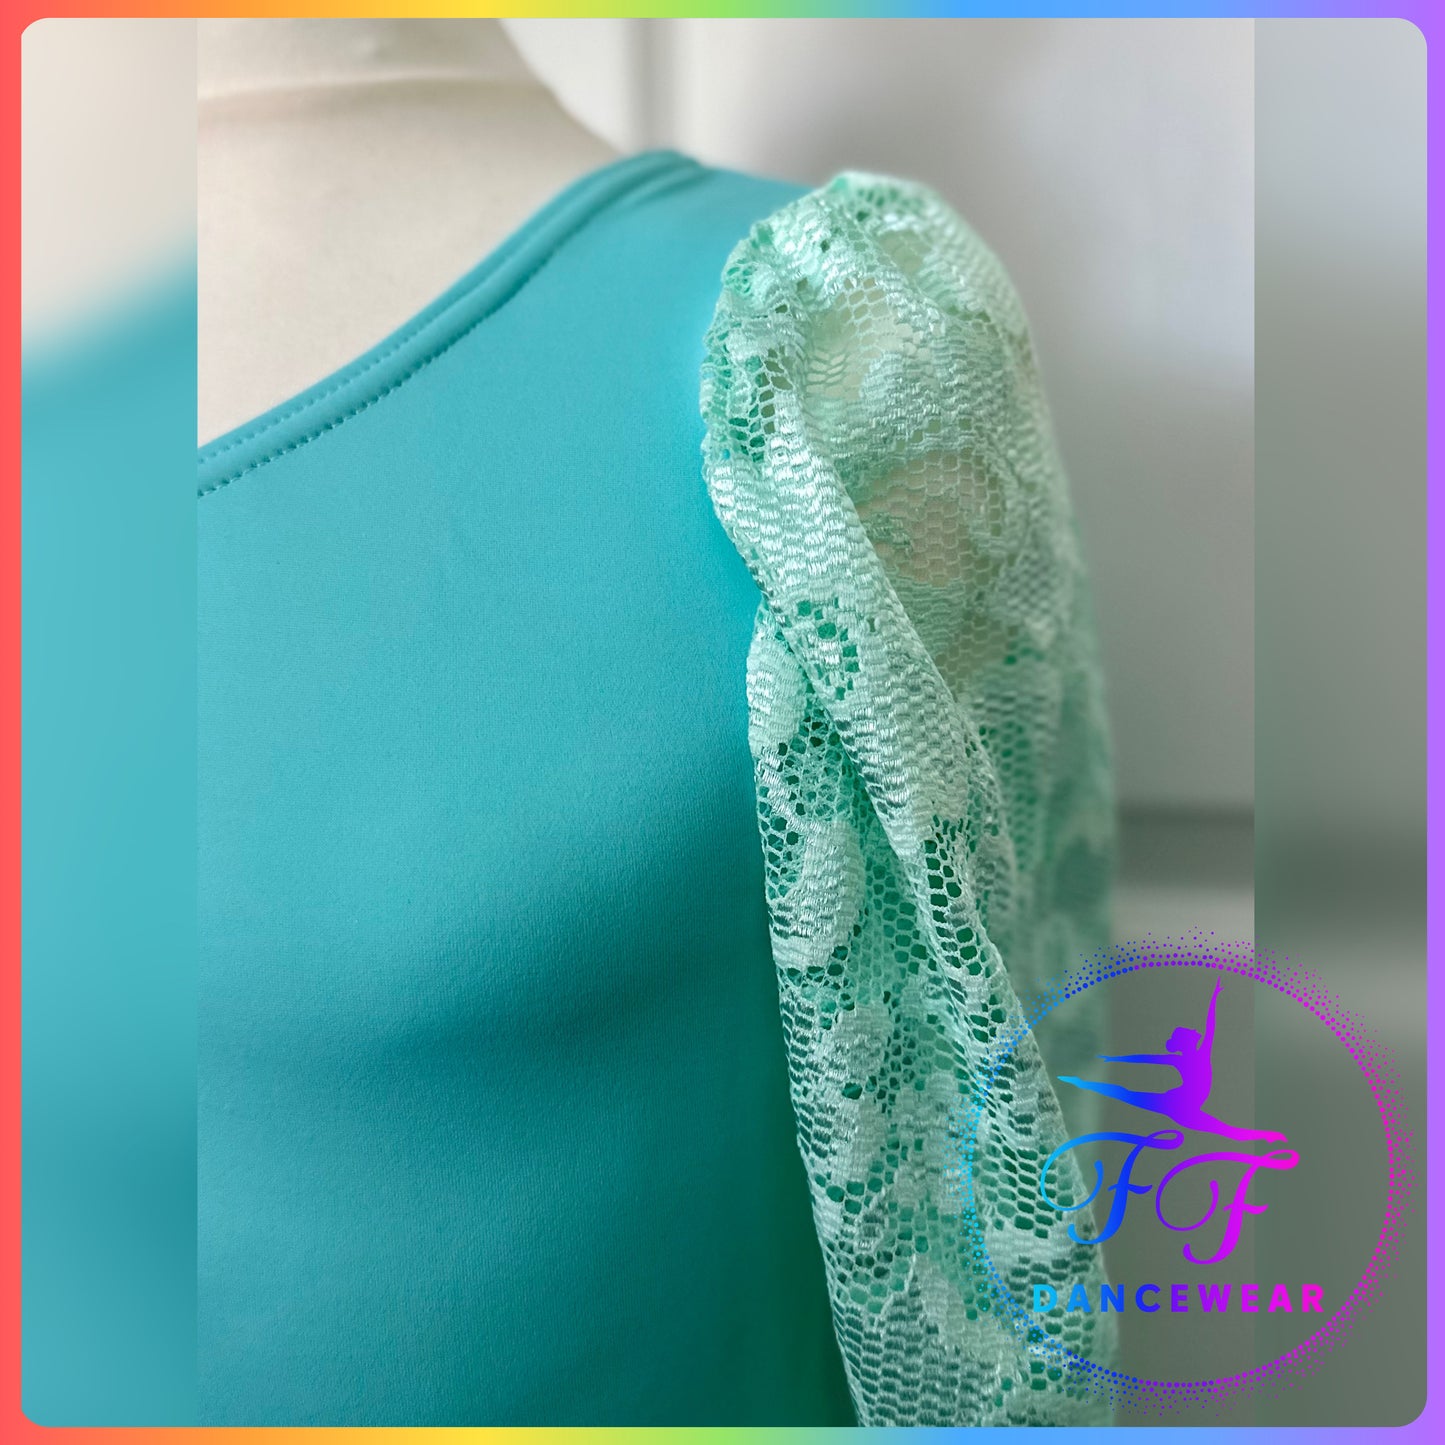 Mint Asymmetrical Leotard and separate open Lace Skirt Lyrical / Contemporary Dance Costume (Size 3a - 11/12 yrs)